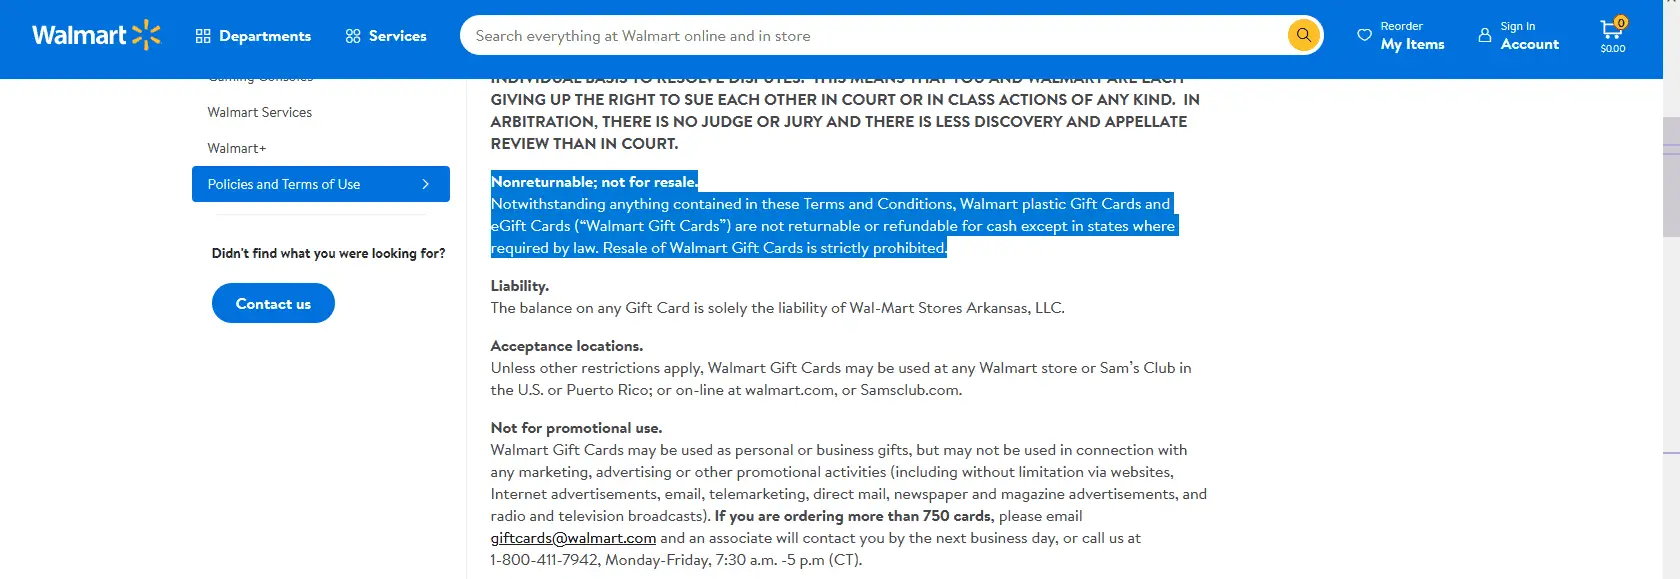 walmart policy about buy other gift cards